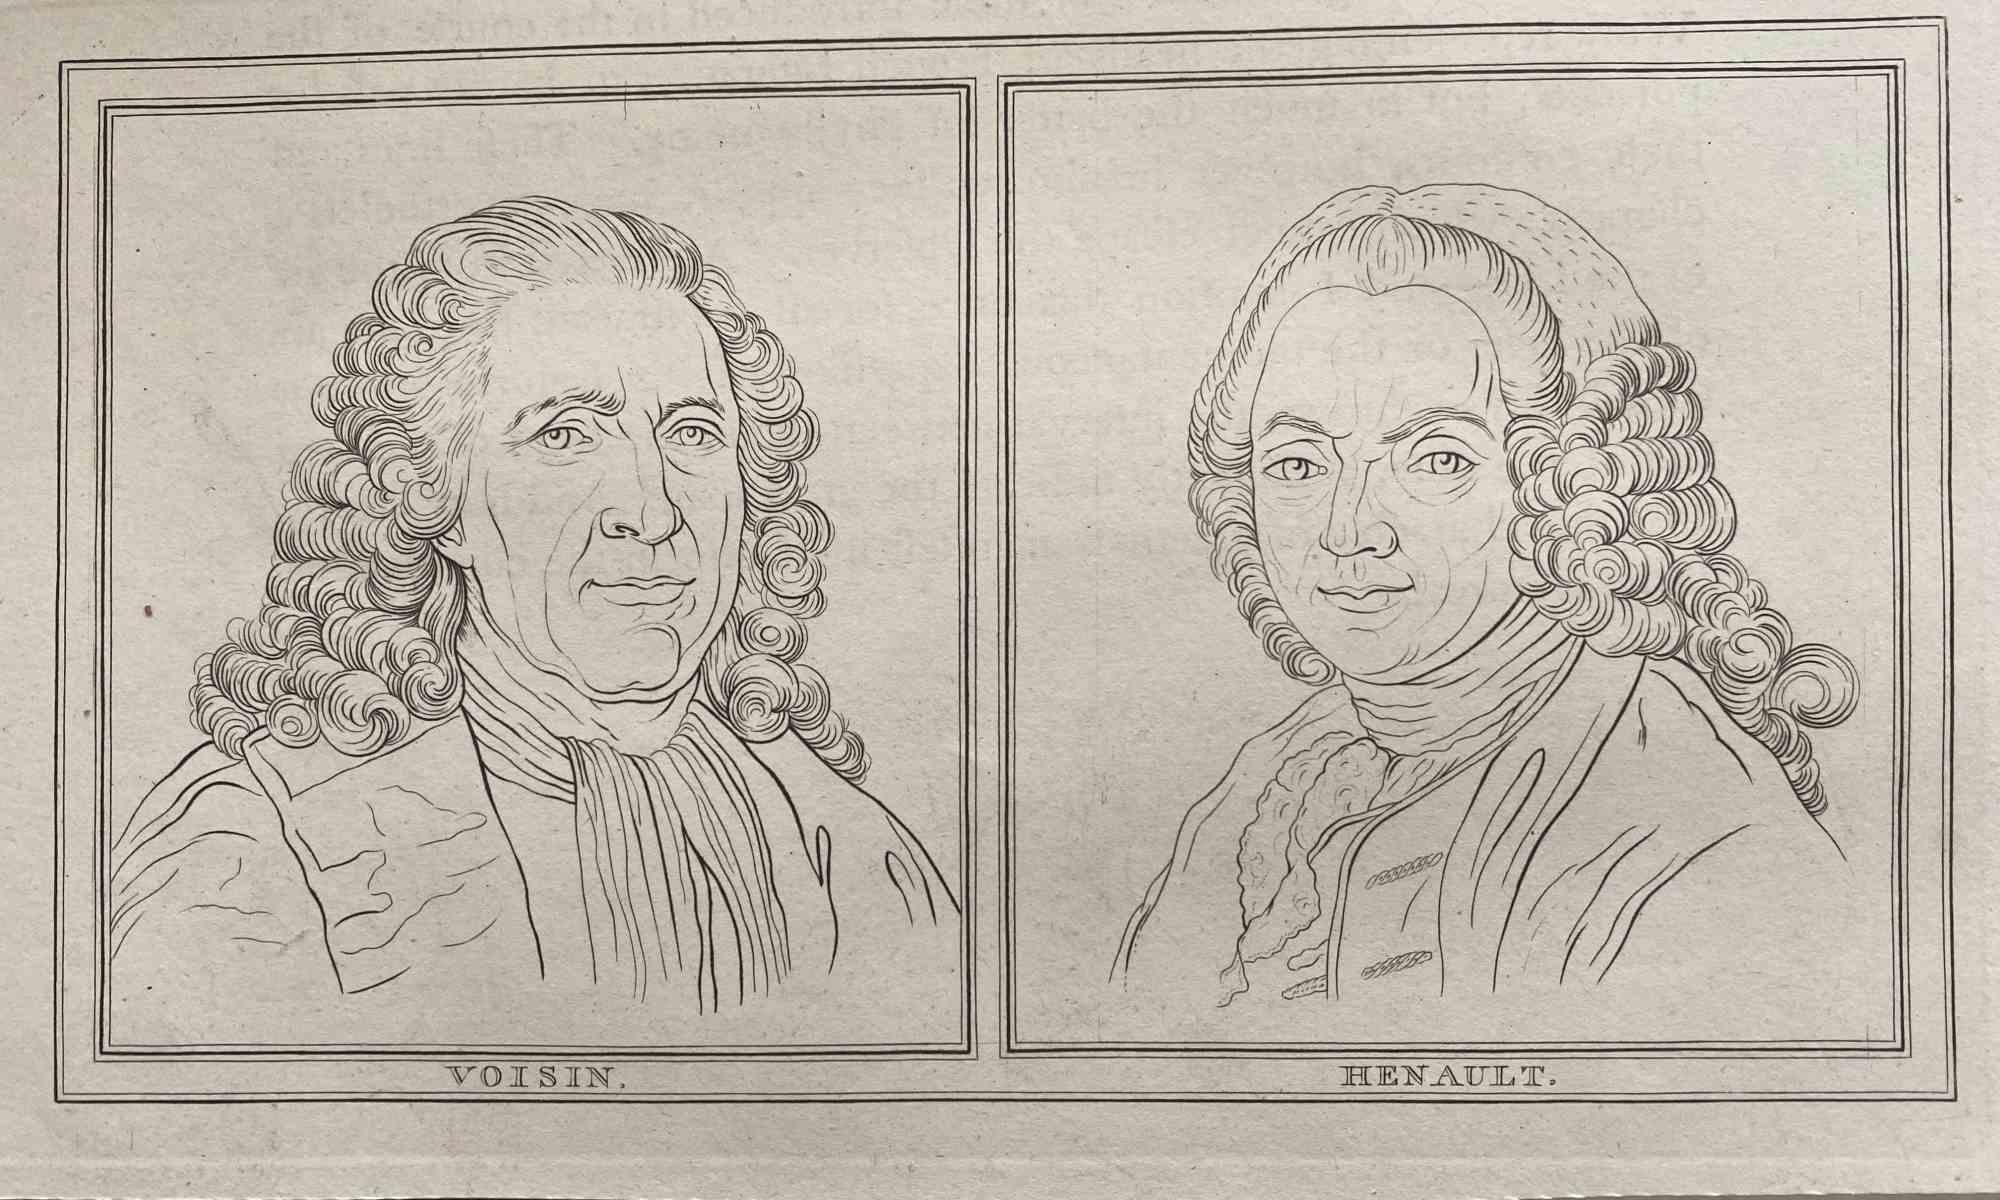 Portrait of Voisin and Henault is an original artwork realized by Thomas Holloway for Johann Caspar Lavater's "Essays on Physiognomy, Designed to promote the Knowledge and the Love of Mankind", London, Bensley, 1810.

 This artwork portrays Voisin